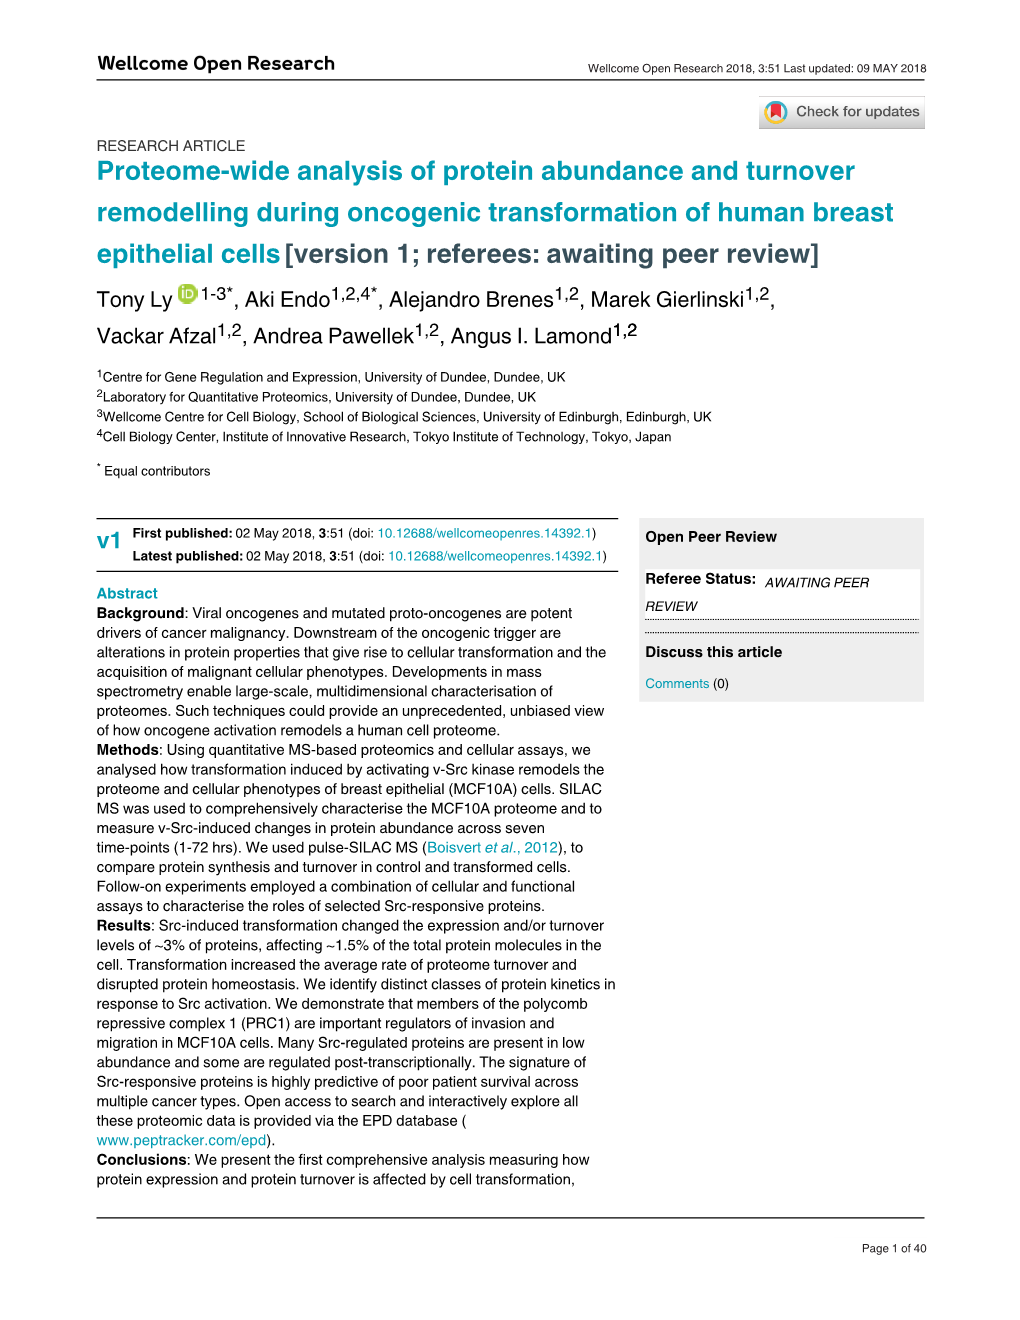 Proteome-Wide Analysis of Protein Abundance and Turnover